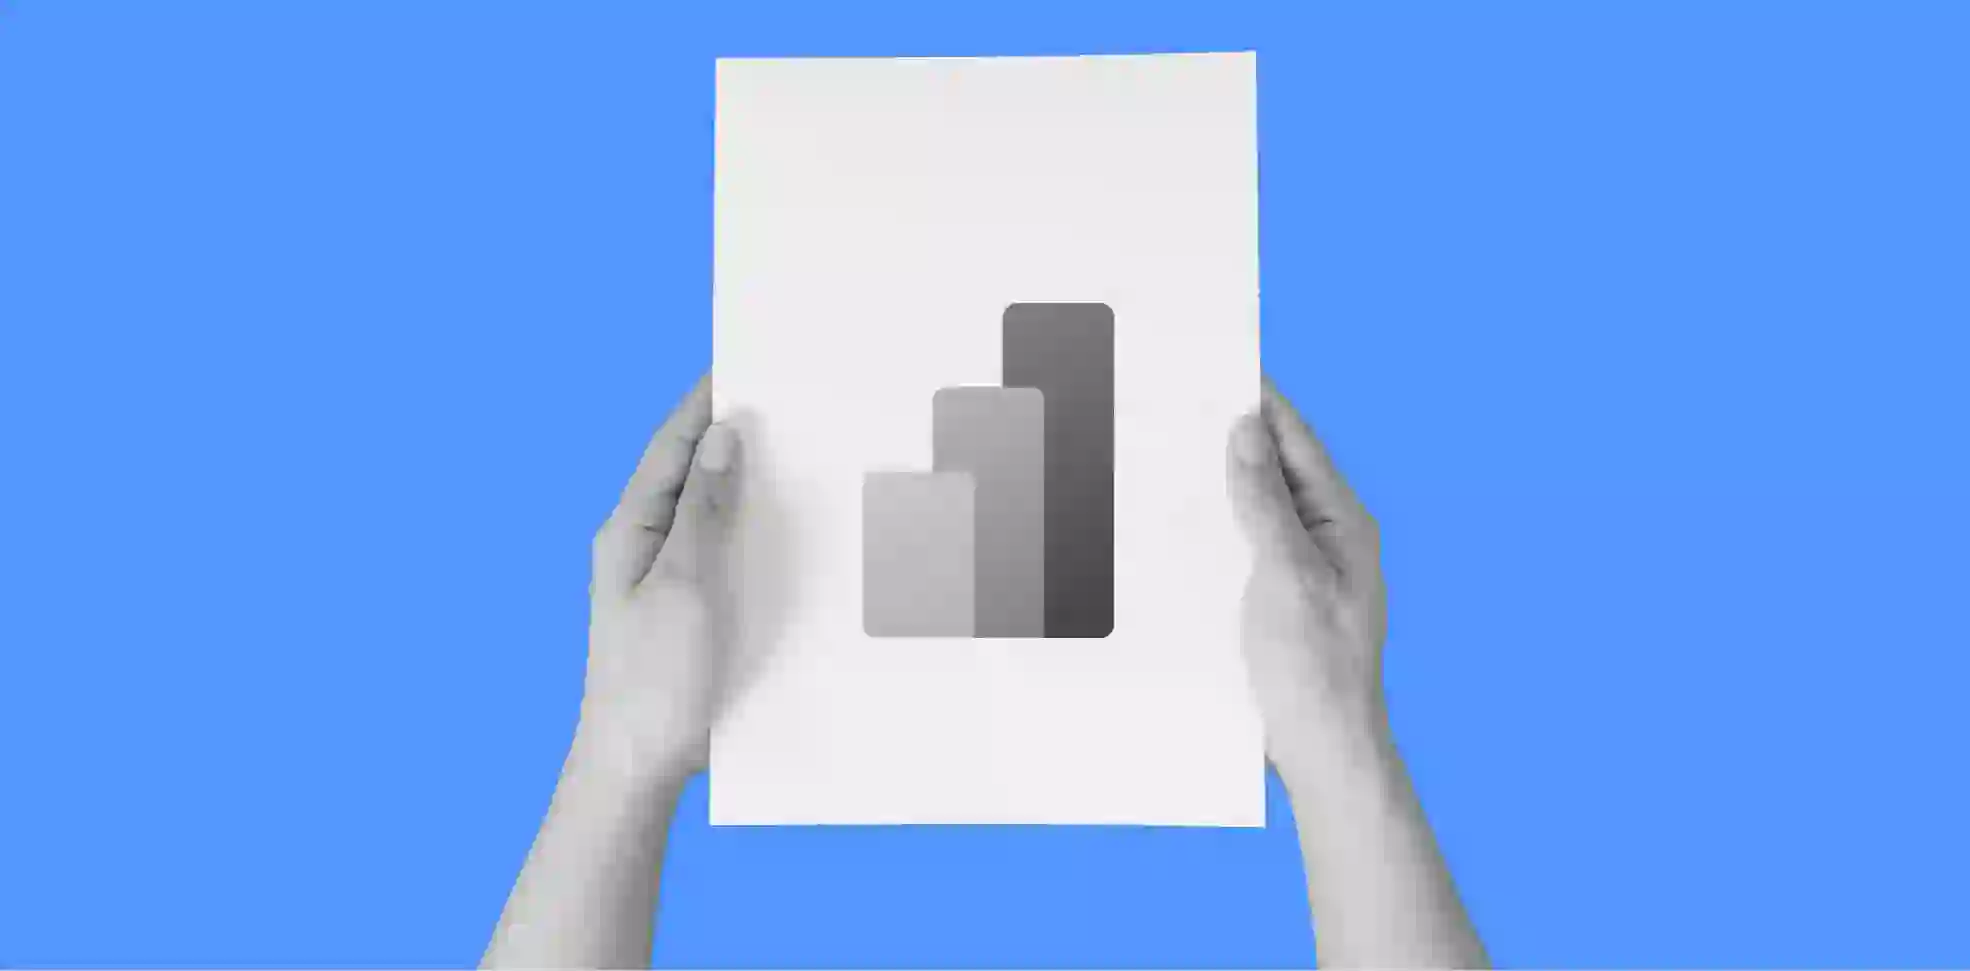 hands holding a sheet of paper with a bar chart on a blue background